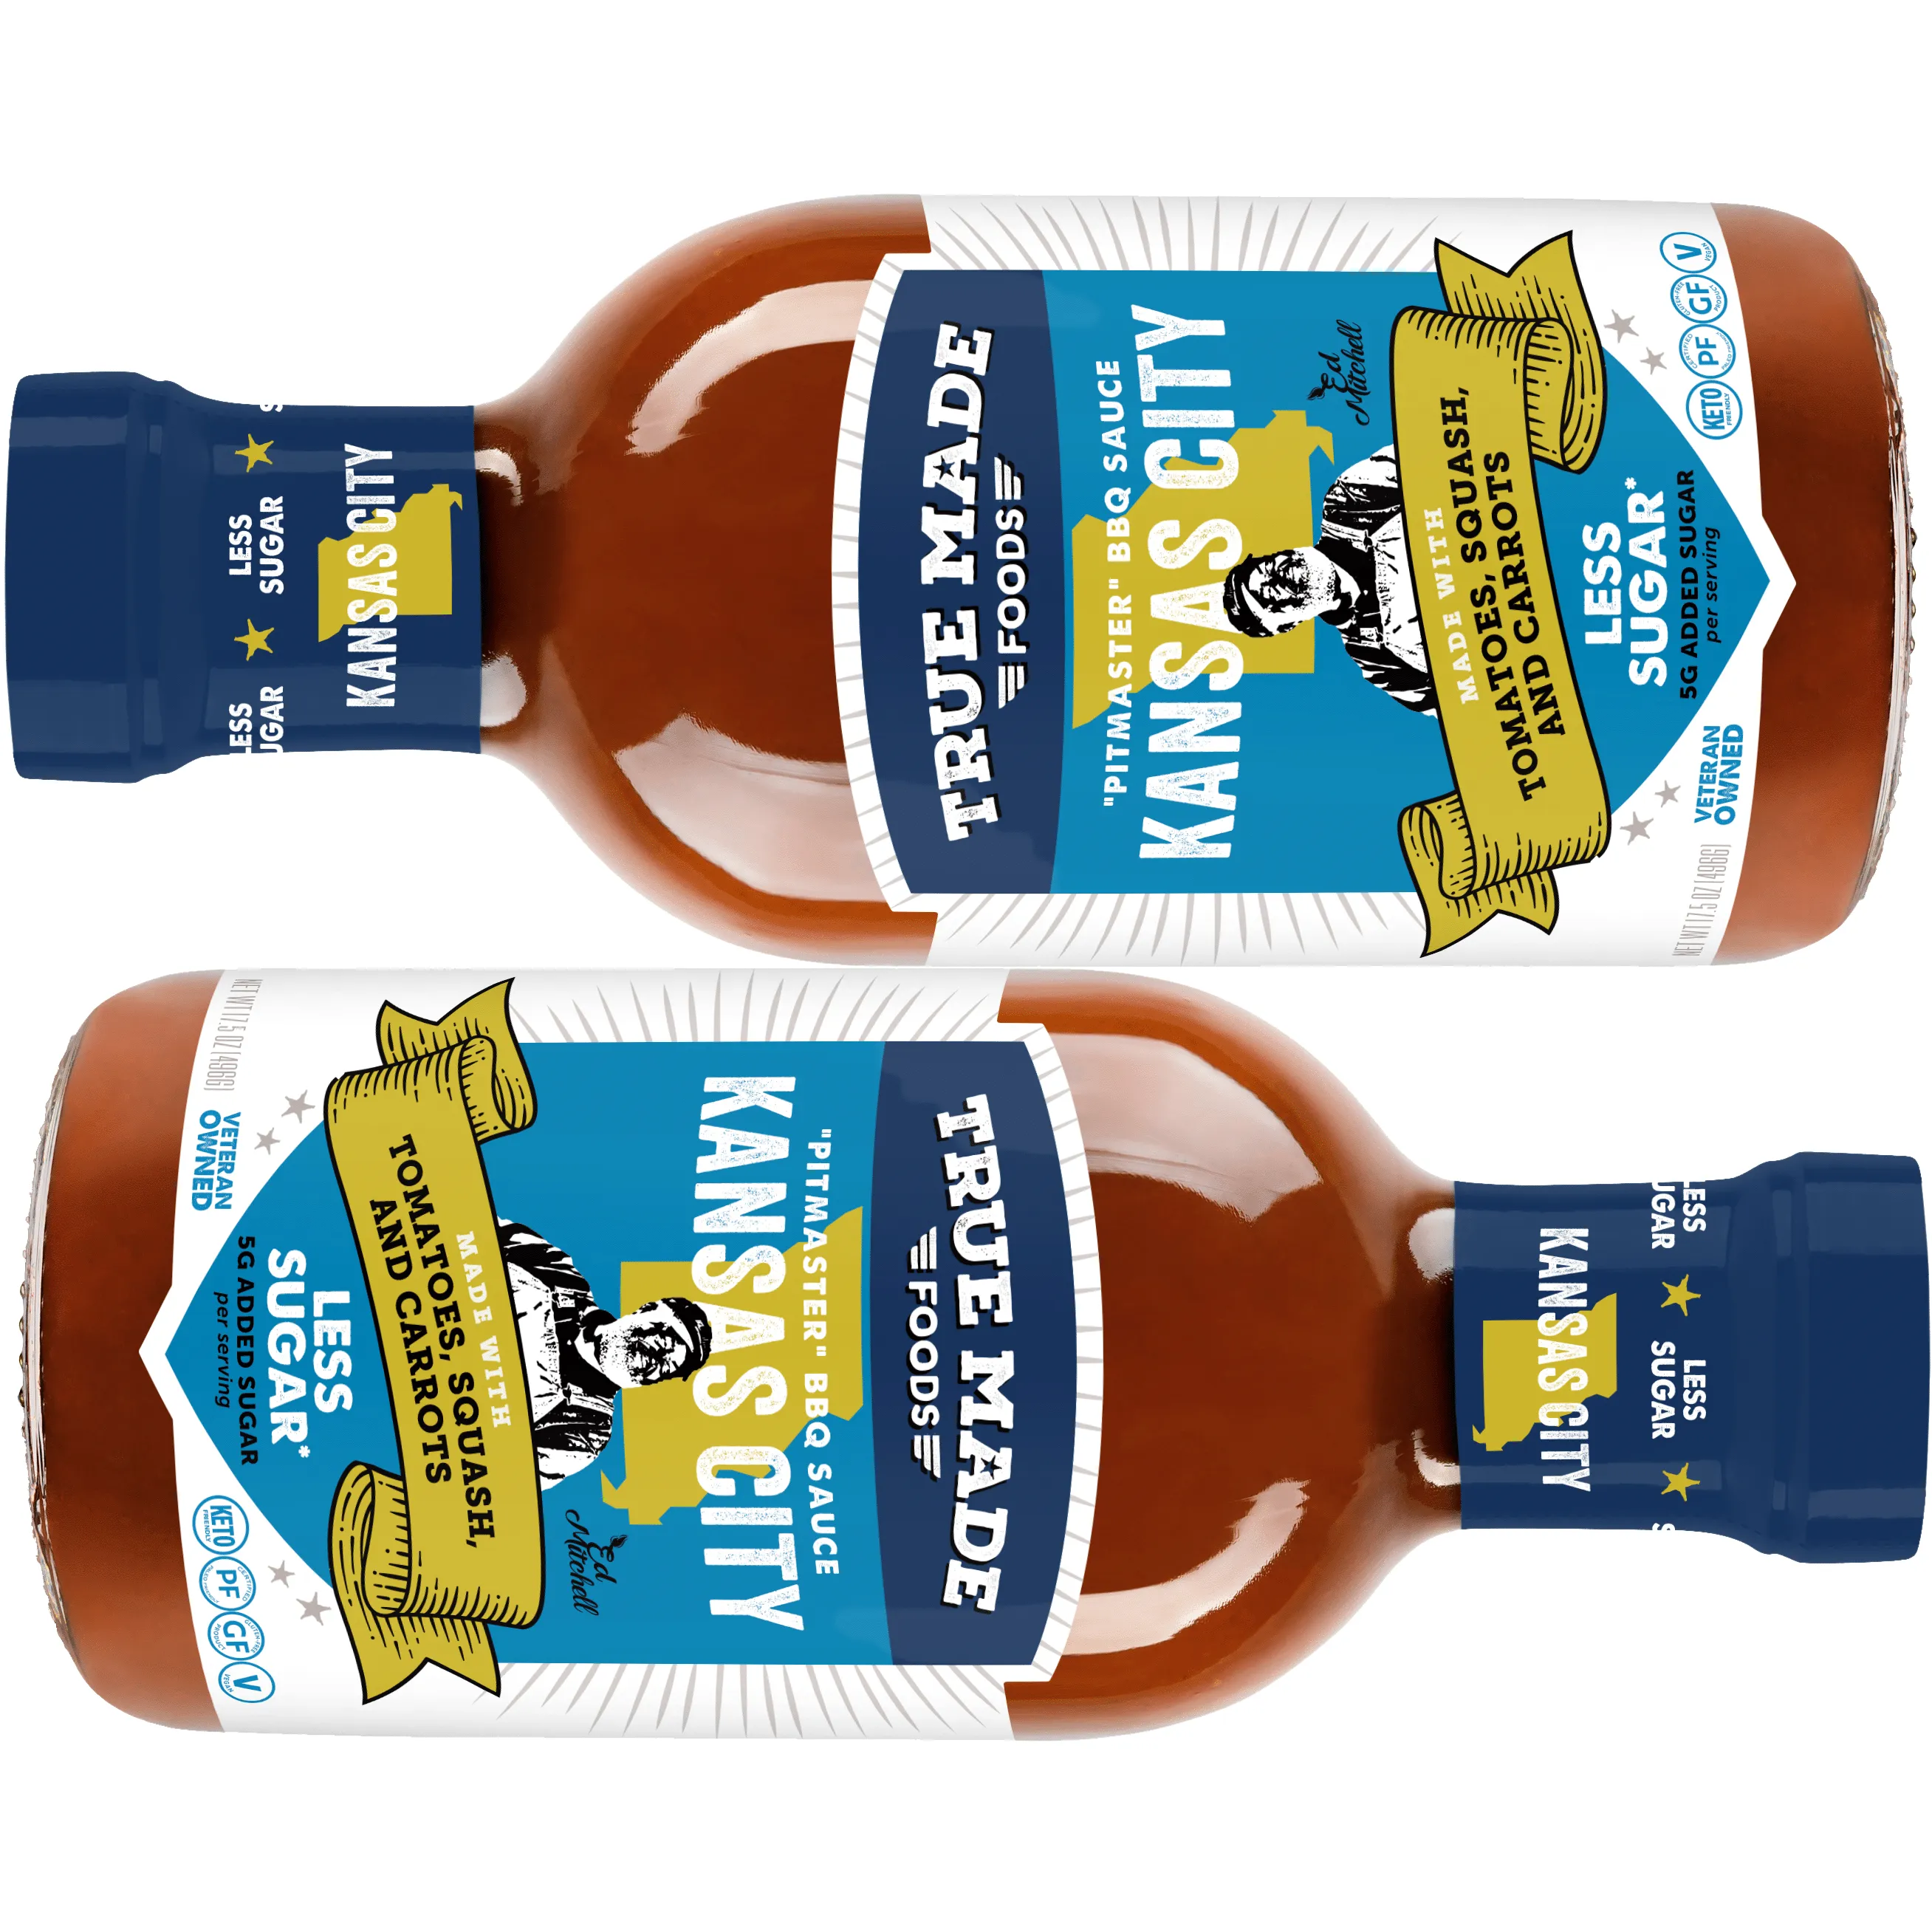 Free No Sugar, All Natural Bbq Sauce By True Made Foods